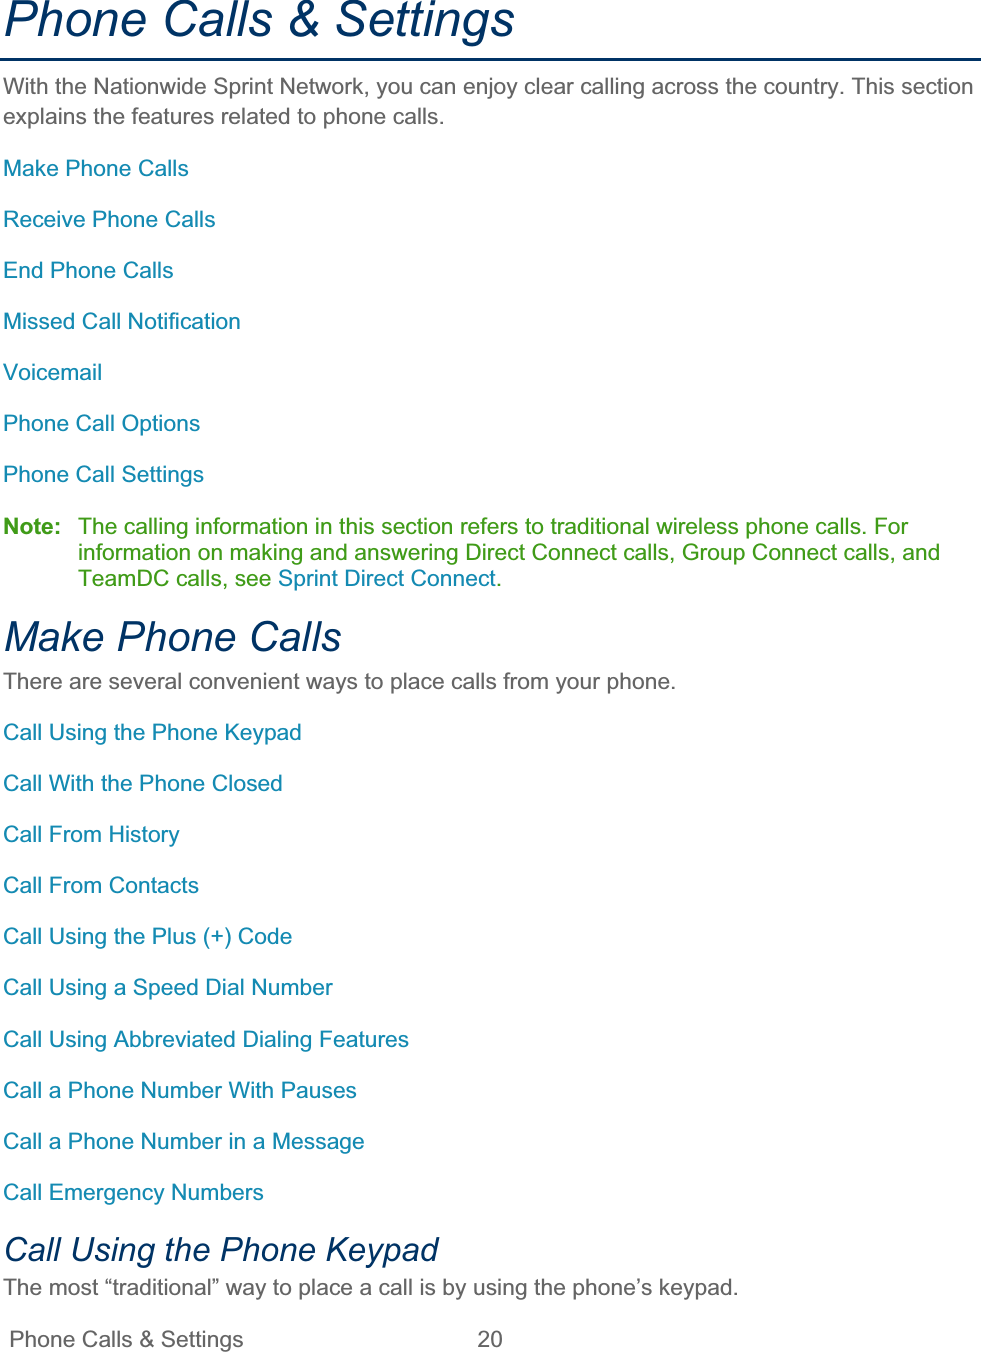 Phone Calls &amp; Settings  20   Phone Calls &amp; Settings With the Nationwide Sprint Network, you can enjoy clear calling across the country. This section explains the features related to phone calls. Make Phone Calls Receive Phone Calls End Phone Calls Missed Call Notification VoicemailPhone Call Options Phone Call Settings Note: The calling information in this section refers to traditional wireless phone calls. For information on making and answering Direct Connect calls, Group Connect calls, and TeamDC calls, see Sprint Direct Connect.Make Phone Calls There are several convenient ways to place calls from your phone. Call Using the Phone Keypad Call With the Phone Closed Call From History Call From Contacts Call Using the Plus (+) Code Call Using a Speed Dial Number Call Using Abbreviated Dialing Features Call a Phone Number With Pauses Call a Phone Number in a Message Call Emergency Numbers Call Using the Phone Keypad The most “traditional” way to place a call is by using the phone’s keypad. 